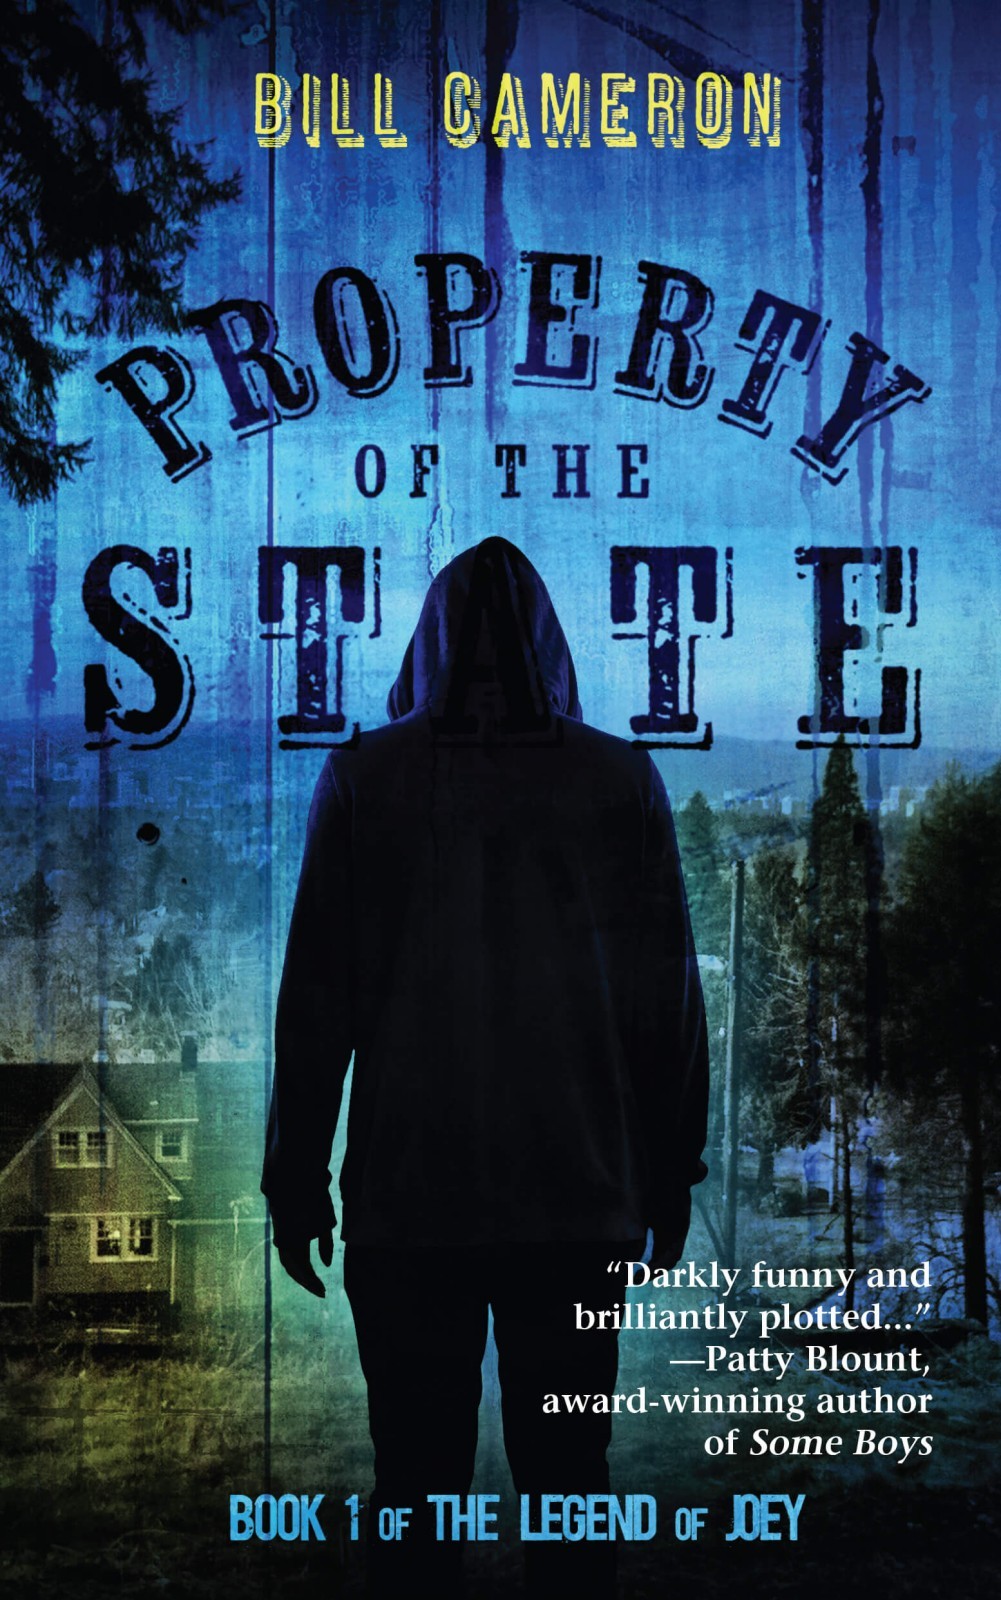 Property of the State